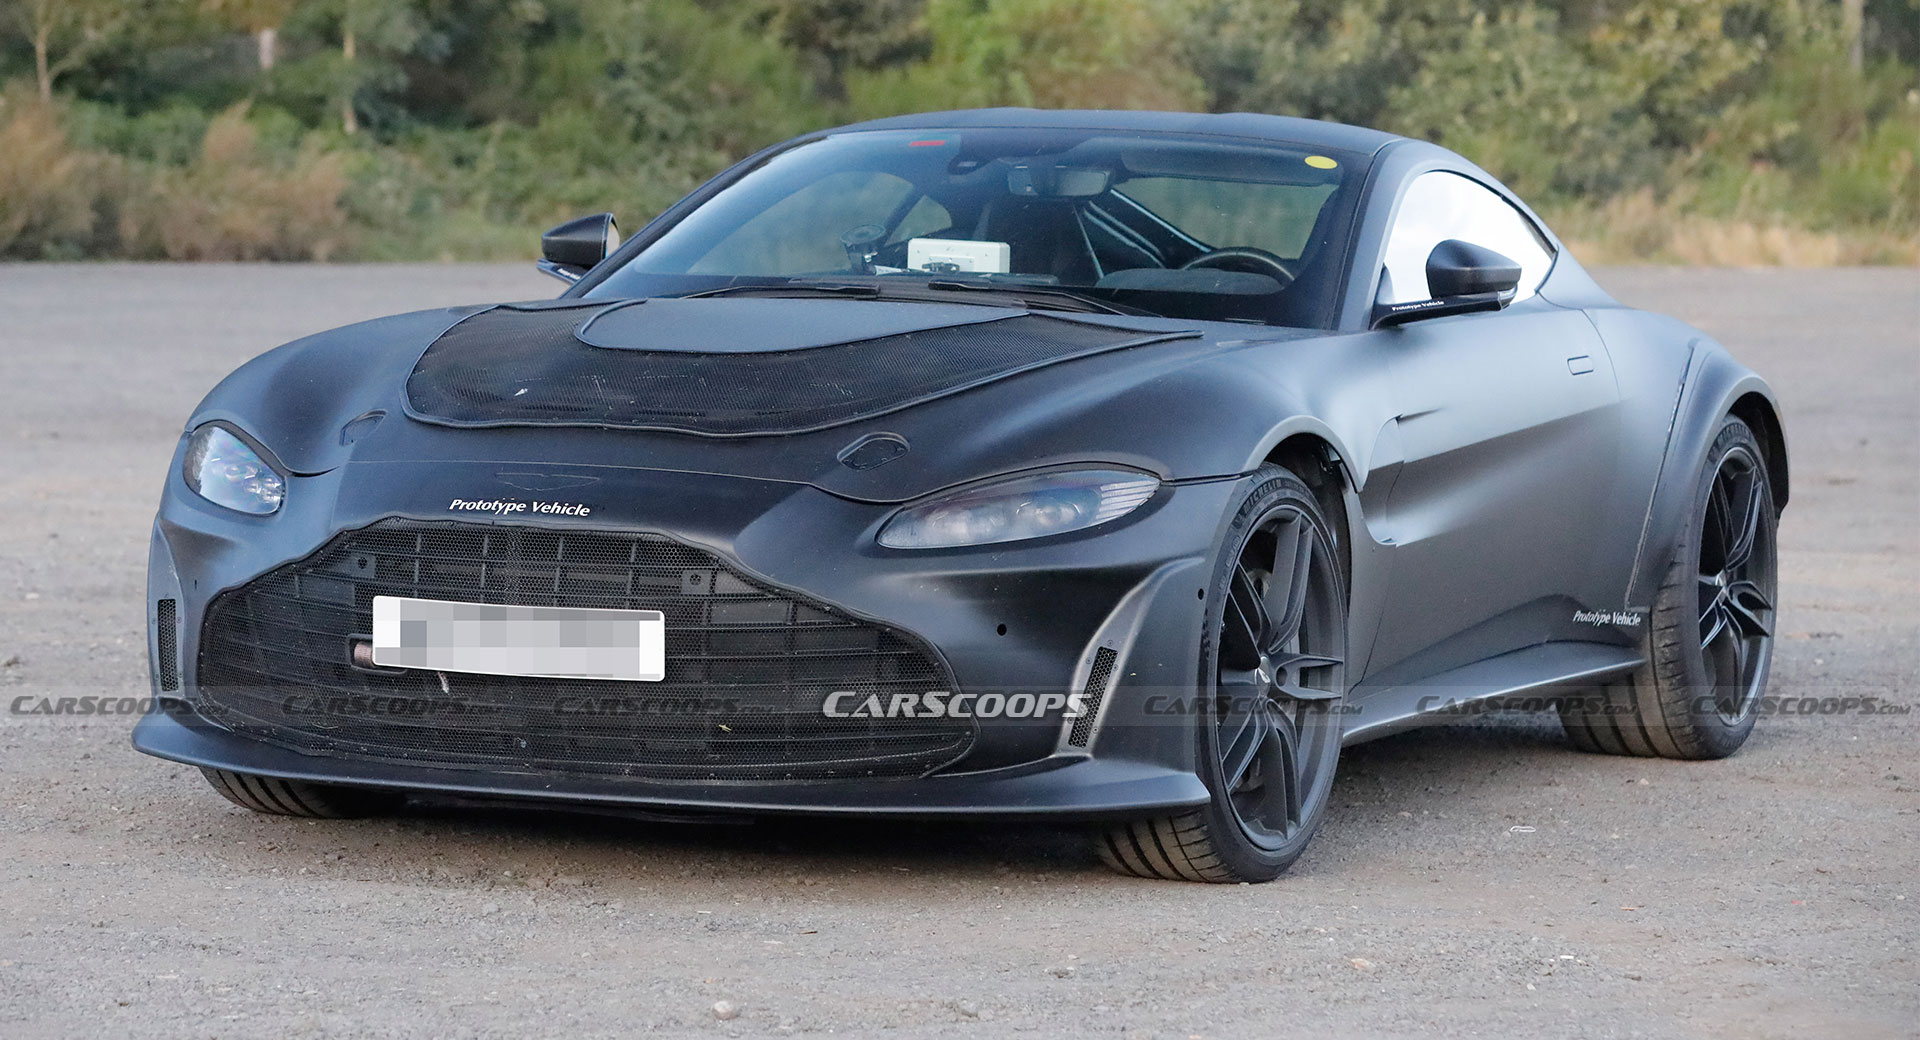 The New Aston Martin V12 Vantage Looks Very Mean And Very Wide | Carscoops